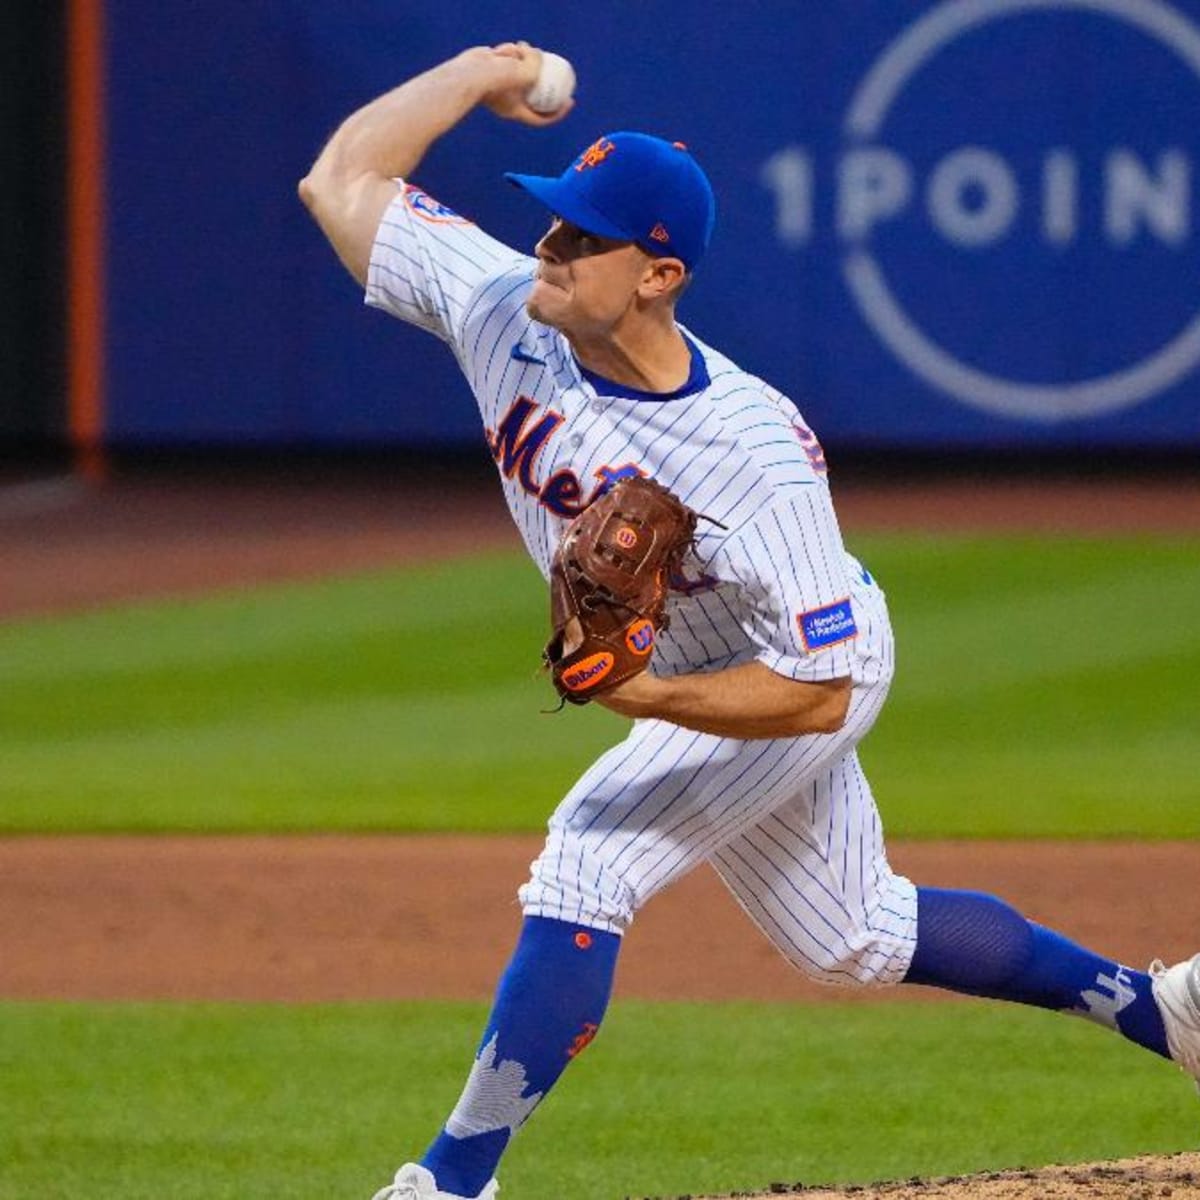 Mets Ex-All-Star Reportedly Club's 'Only Tradeable Player' Ahead of Trade  Deadline - Sports Illustrated New York Mets News, Analysis and More